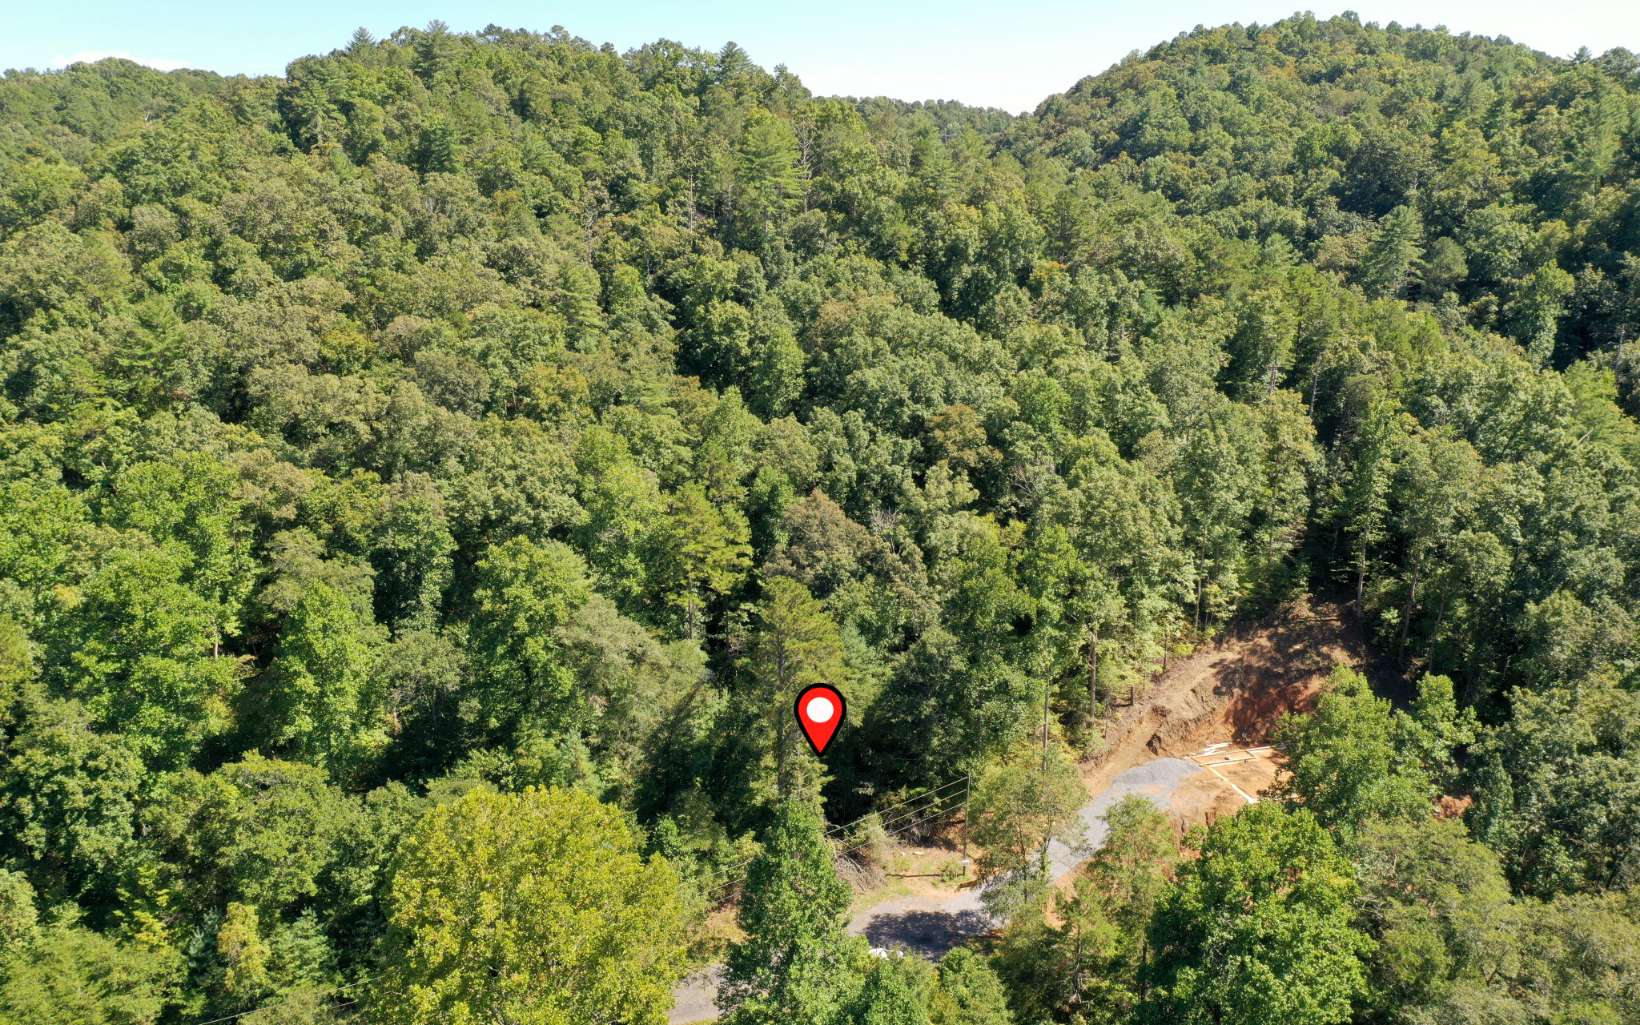 Enjoy the wonders of the North Georgia Mountains and build your dream mountain home in the gated Talking Rock Creek Resort! This 3.88-acre lot is less than 500 feet from Talking Rock Creek and would be perfect for a cabin with a large deck to enjoy the gorgeous mountains and listen to the sounds of the creek. This community is just an hour from Atlanta and offers fantastic amenities such as 2 pools, tennis, a fitness center, hiking, foraging, fishing, wildlife watching, and more. Spend the day out on Carter's lake, enjoying the beach, boating, hiking the trails, or take a short drive to visit several local vineyards, orchards, tubing, and charming towns like Historic Downtown Ellijay, Blue Ridge, and McCaysville. Owners are motivated make your offer today!